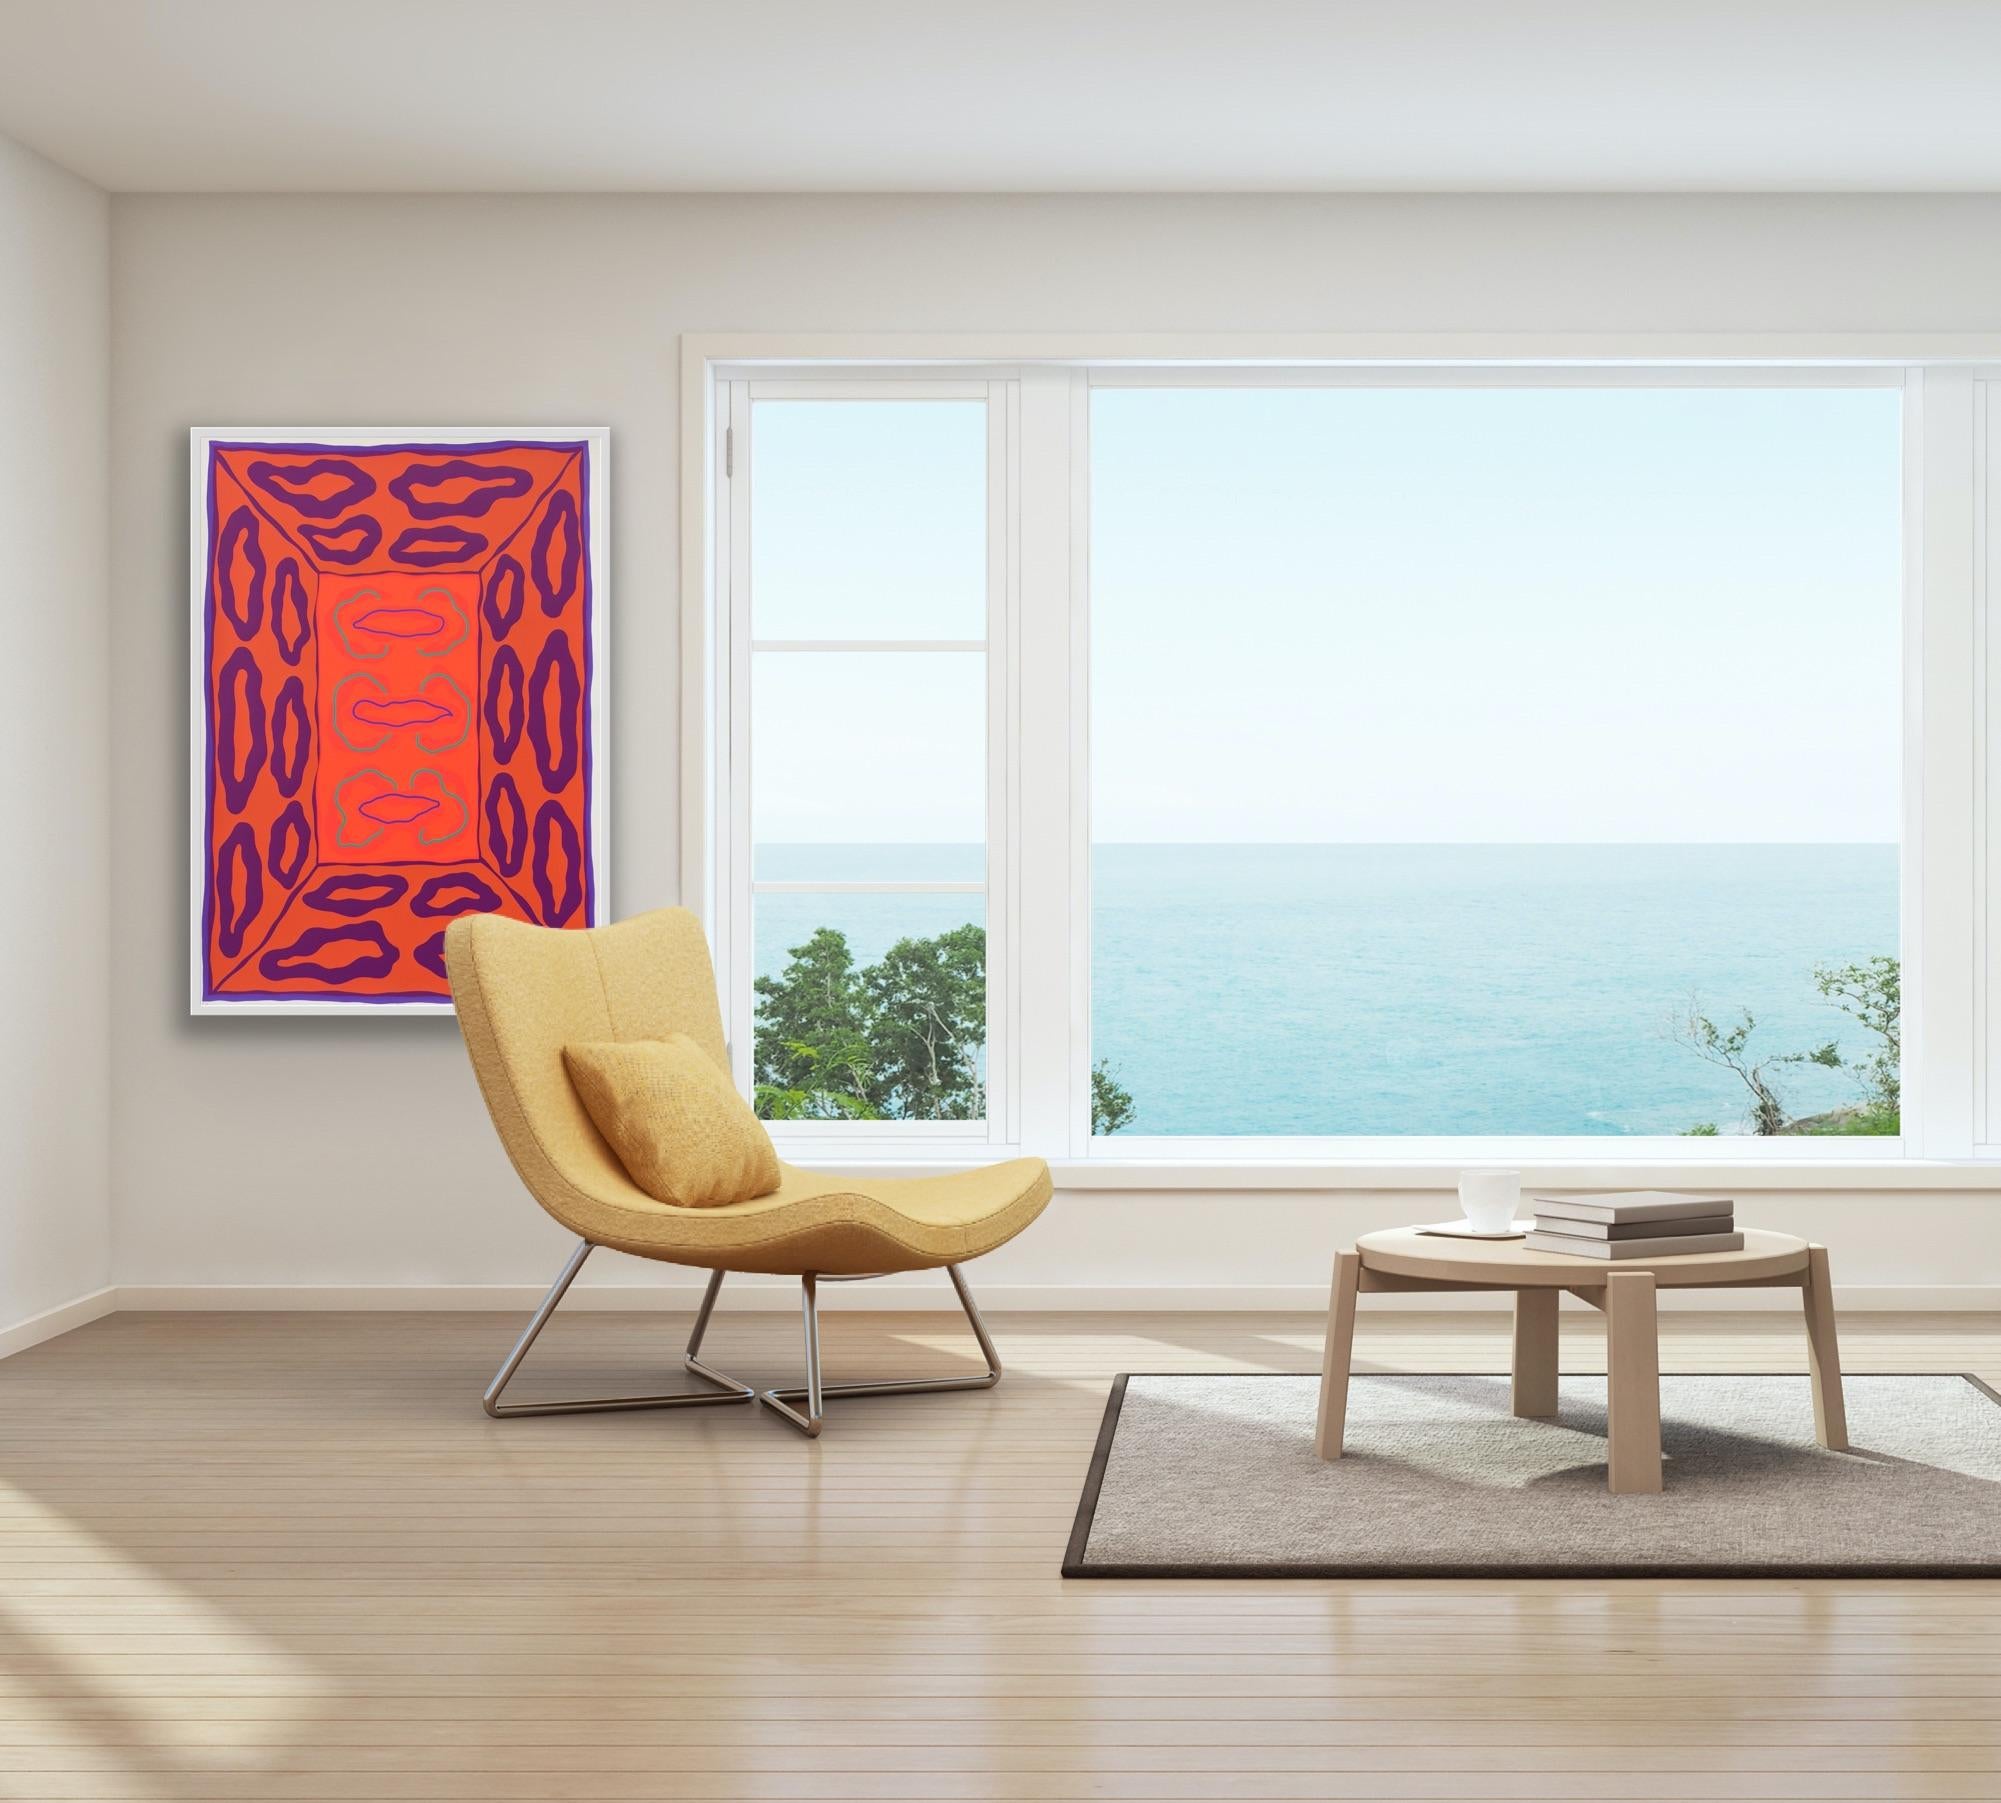 Anthony Benjamin’s Limited Edition Print from the Roxy Bias Suite is a fantastic example of Benjamin’s engagement with art’s potential for vibrancy. With a nomadic heart that beat to the countercultural currents of his time, Benjamin’s career as an